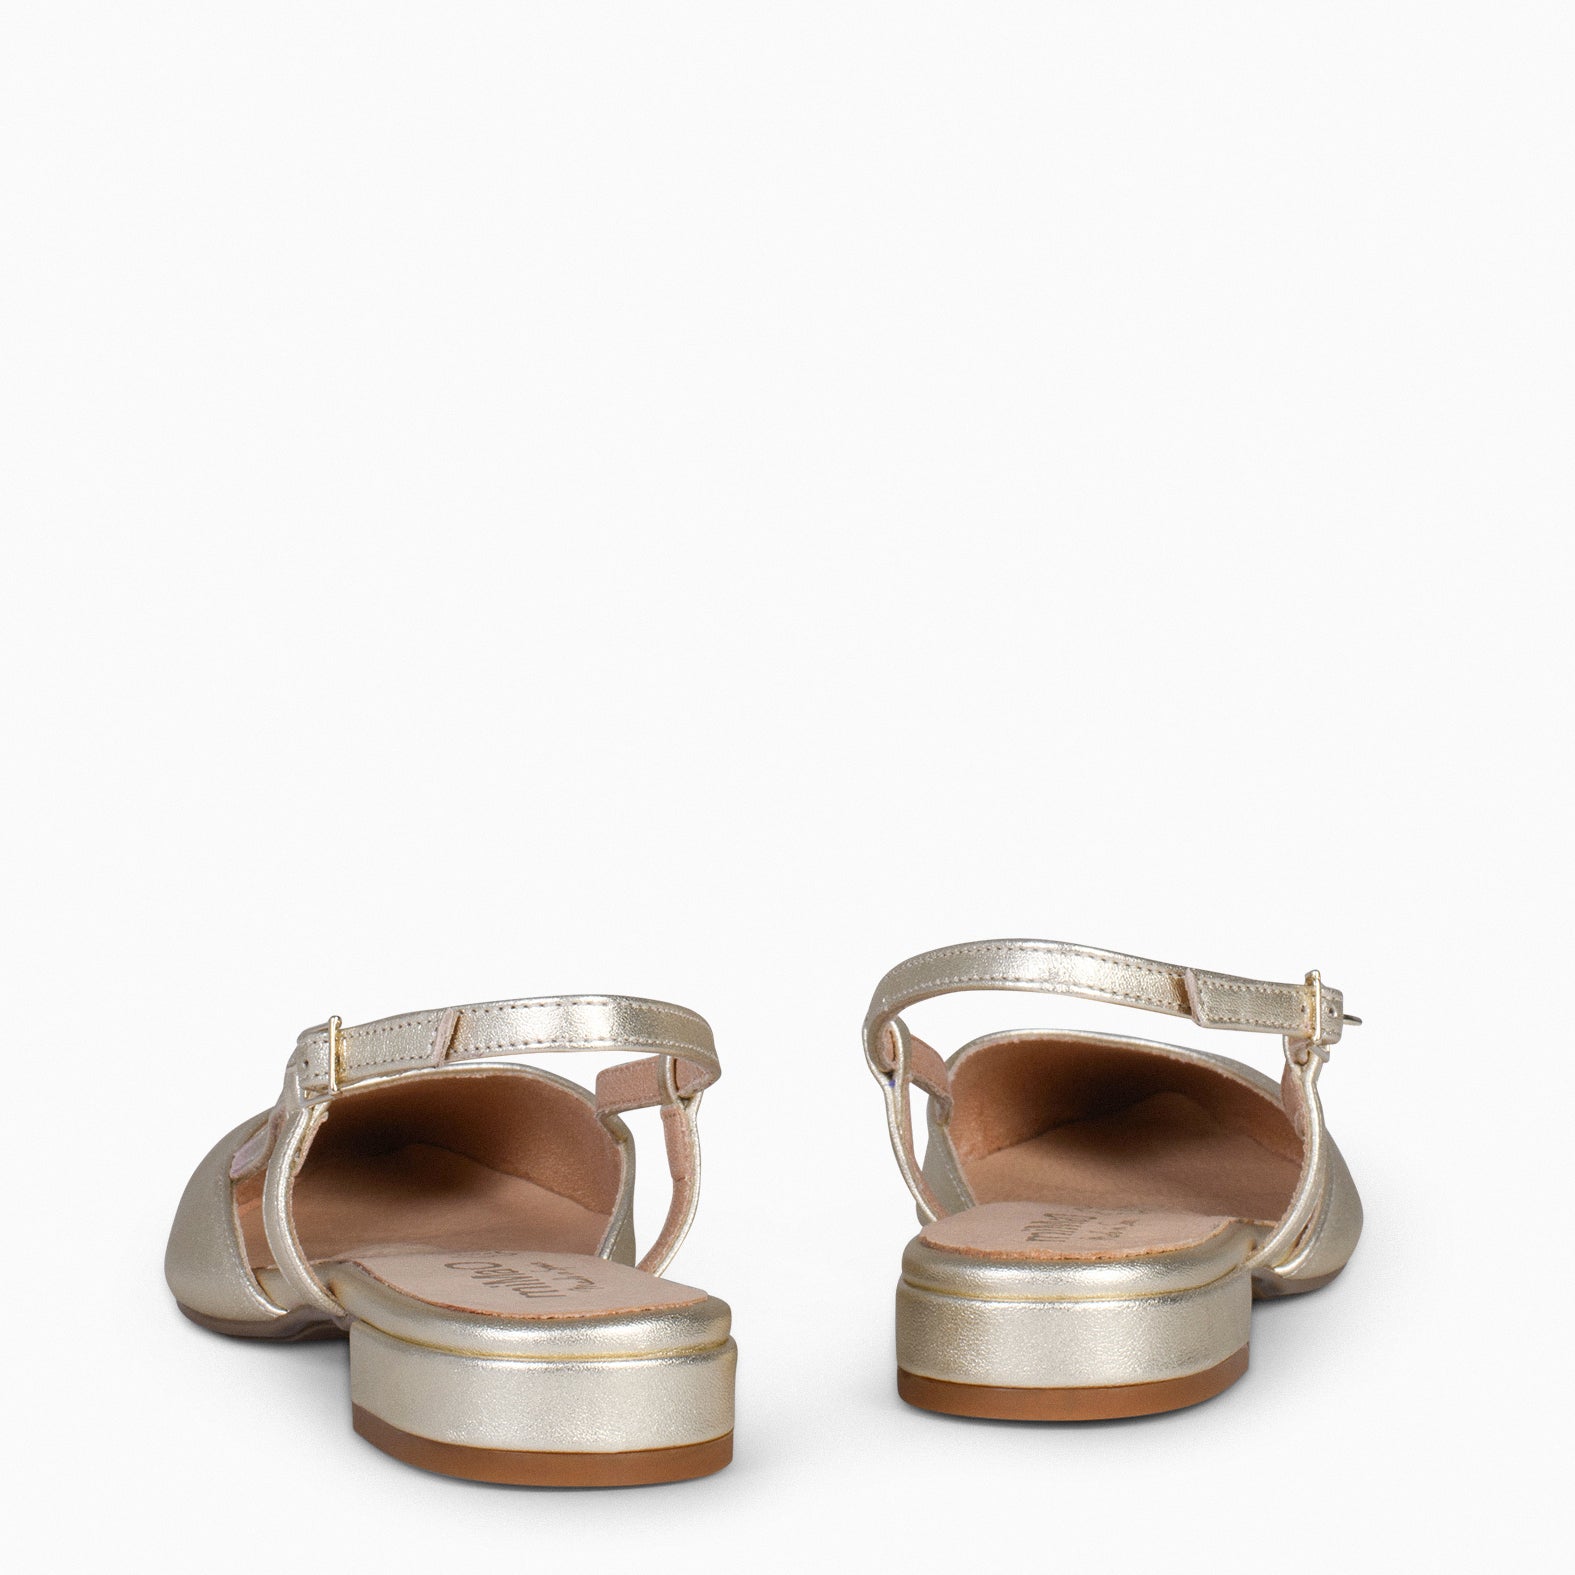 BRUNCH – Chaussures Slingbacks plates OR